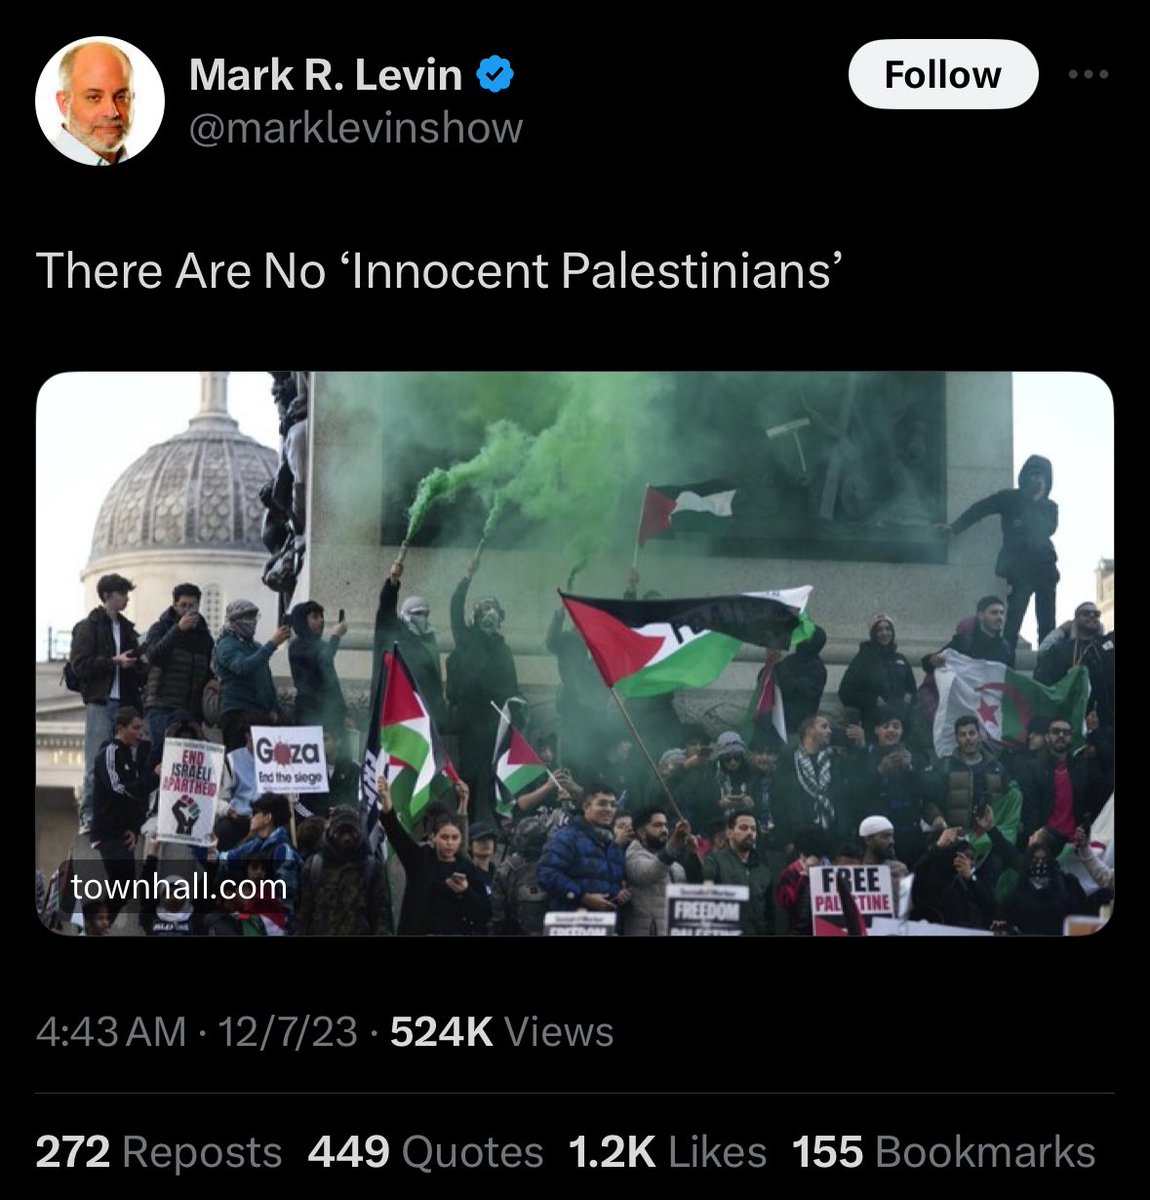 If you think like this, (whether it’s about Palestinians or Israelis) you are part of the problem and making it worse.